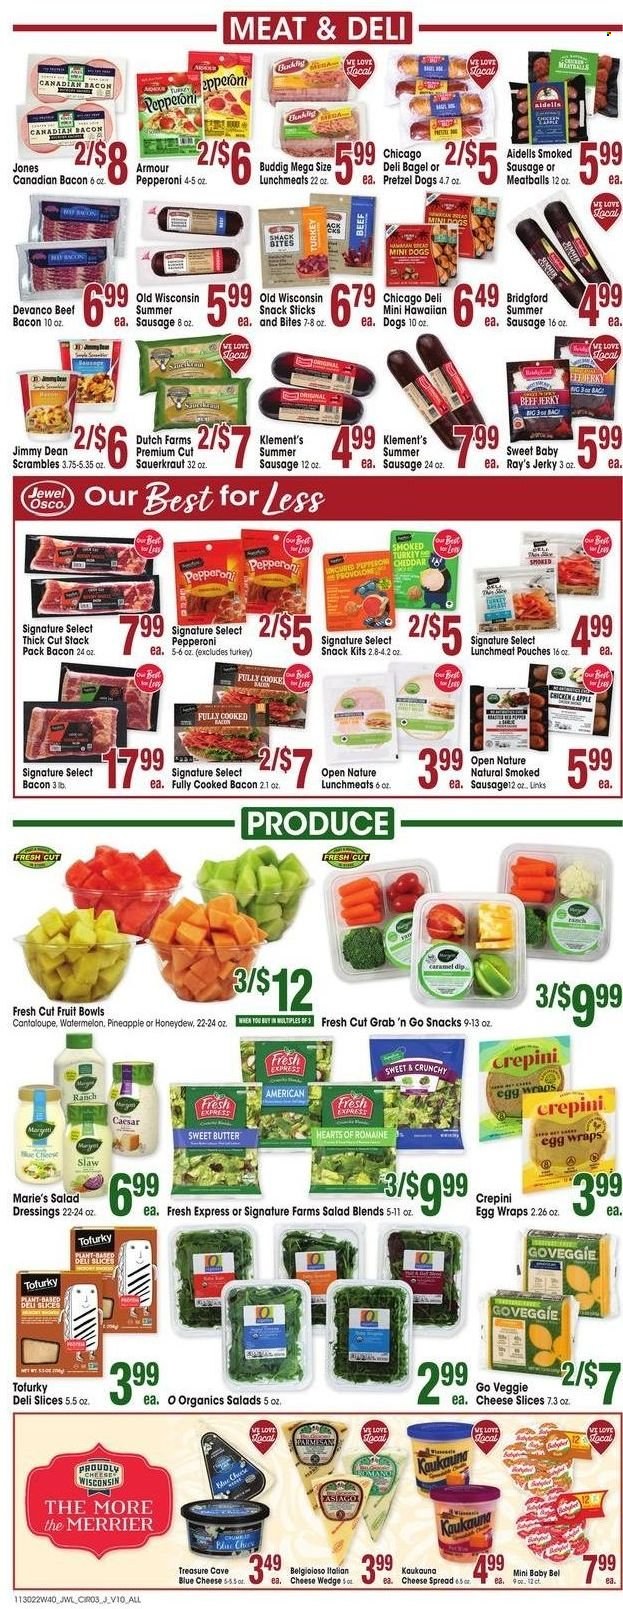 thumbnail - Jewel Osco Flyer - 11/30/2022 - 12/06/2022 - Sales products - bagels, pretzels, wraps, watermelon, honeydew, meatballs, Jimmy Dean, bacon, beef jerky, canadian bacon, jerky, sausage, smoked sausage, summer sausage, pepperoni, lunch meat, sliced cheese, cheddar, parmesan, cheese, Provolone, eggs, butter, snack, sauerkraut, caramel, salad dressing, bag, pet bed. Page 3.